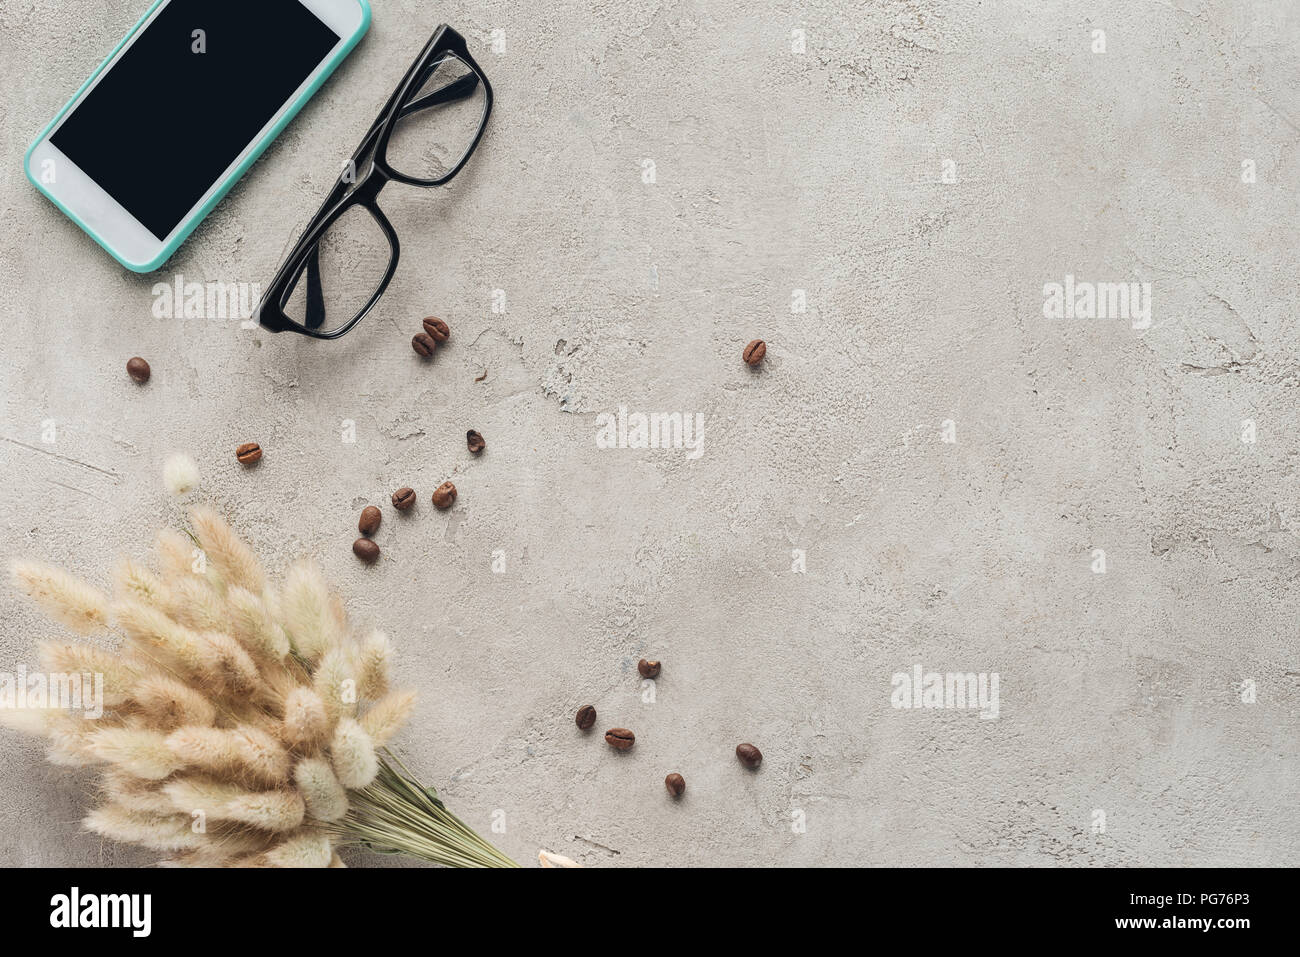 top view of smartphone with blank screen with eyeglasses, spilled coffee beans and lagurus ovatus bouquet on concrete surface Stock Photo